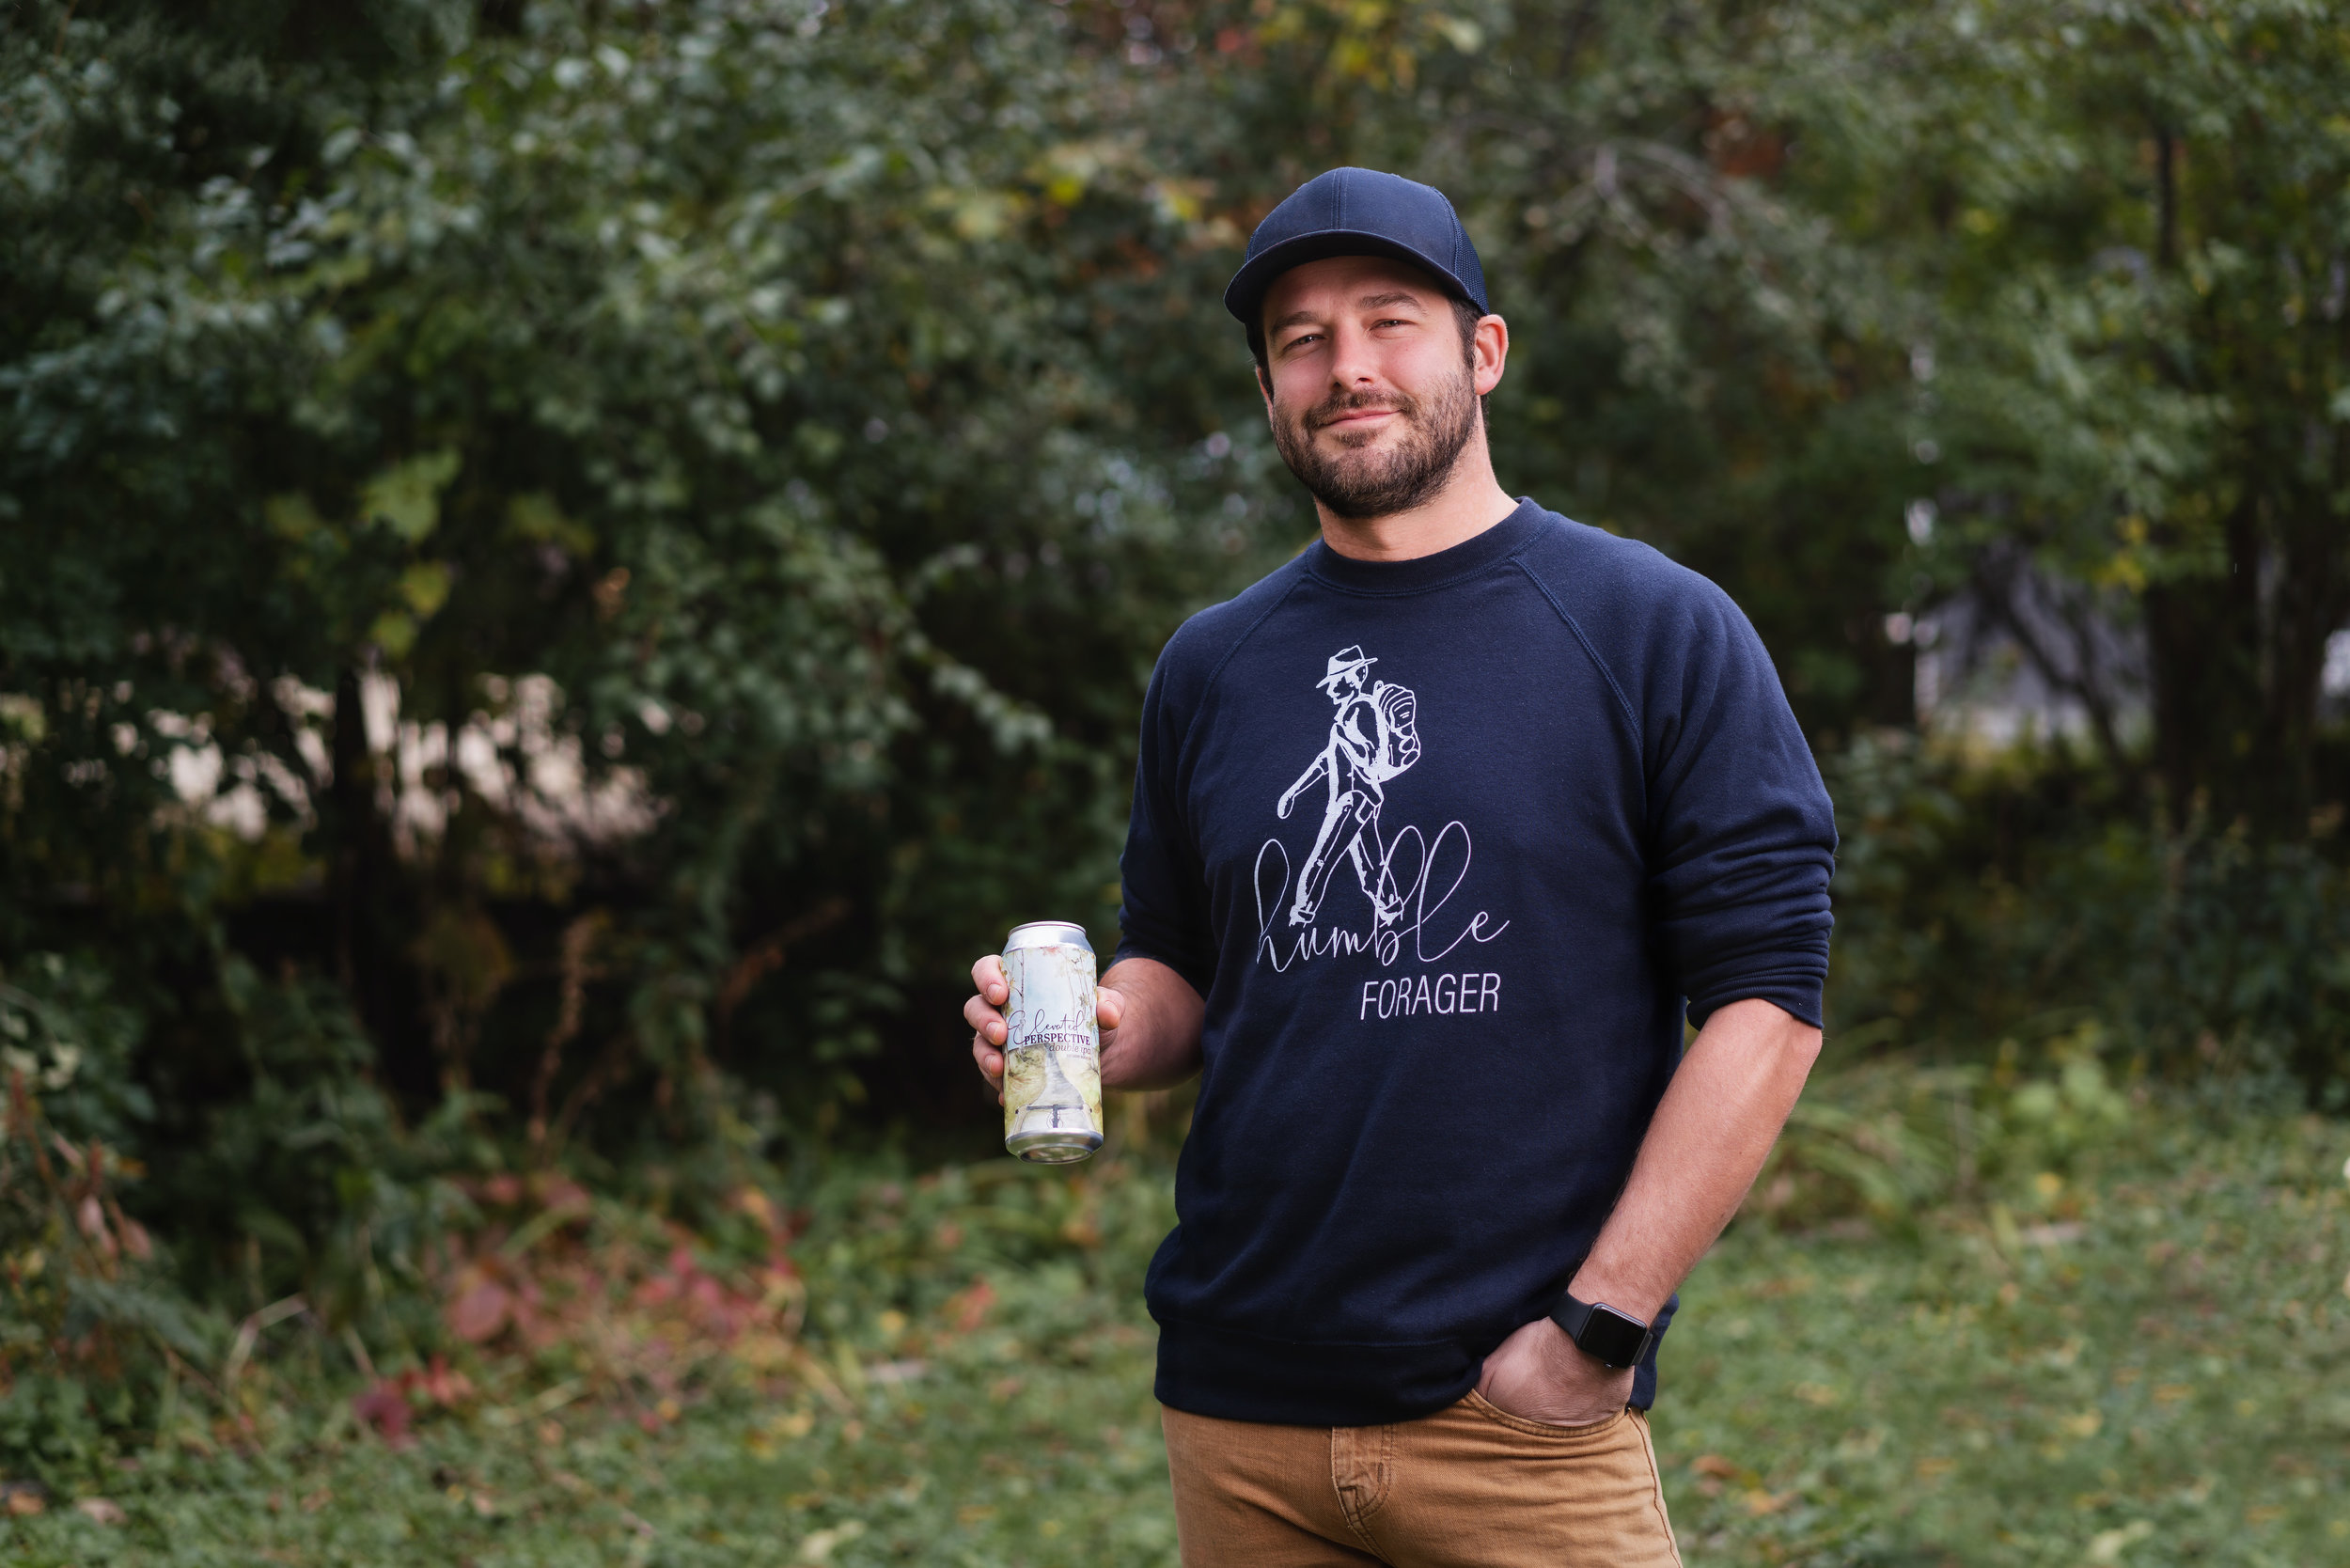 Forager starts spin-off business with plans to distribute beer around the country